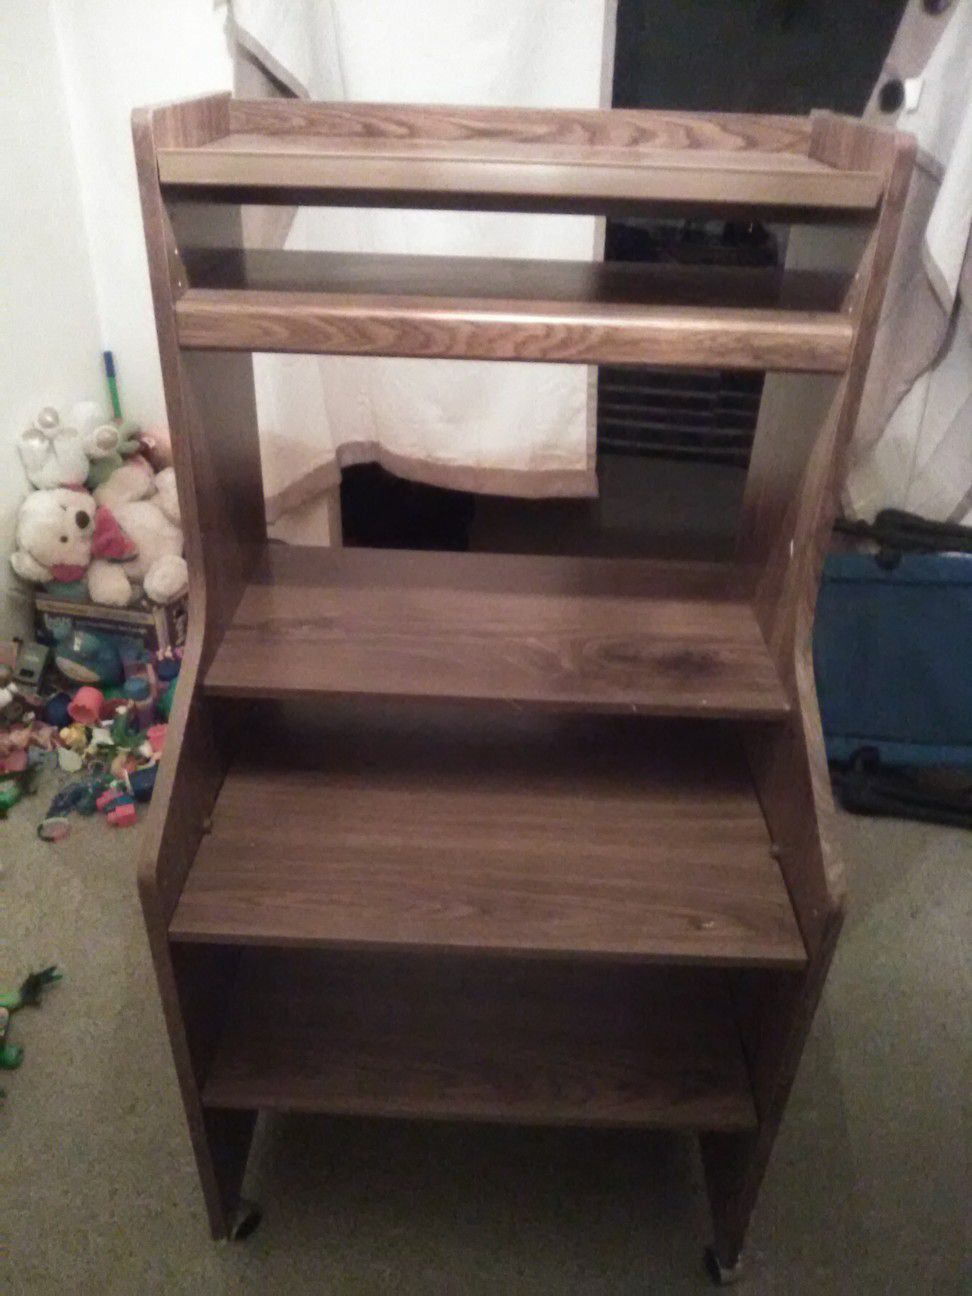 Wood shelf desk like new condition pickup only no holds